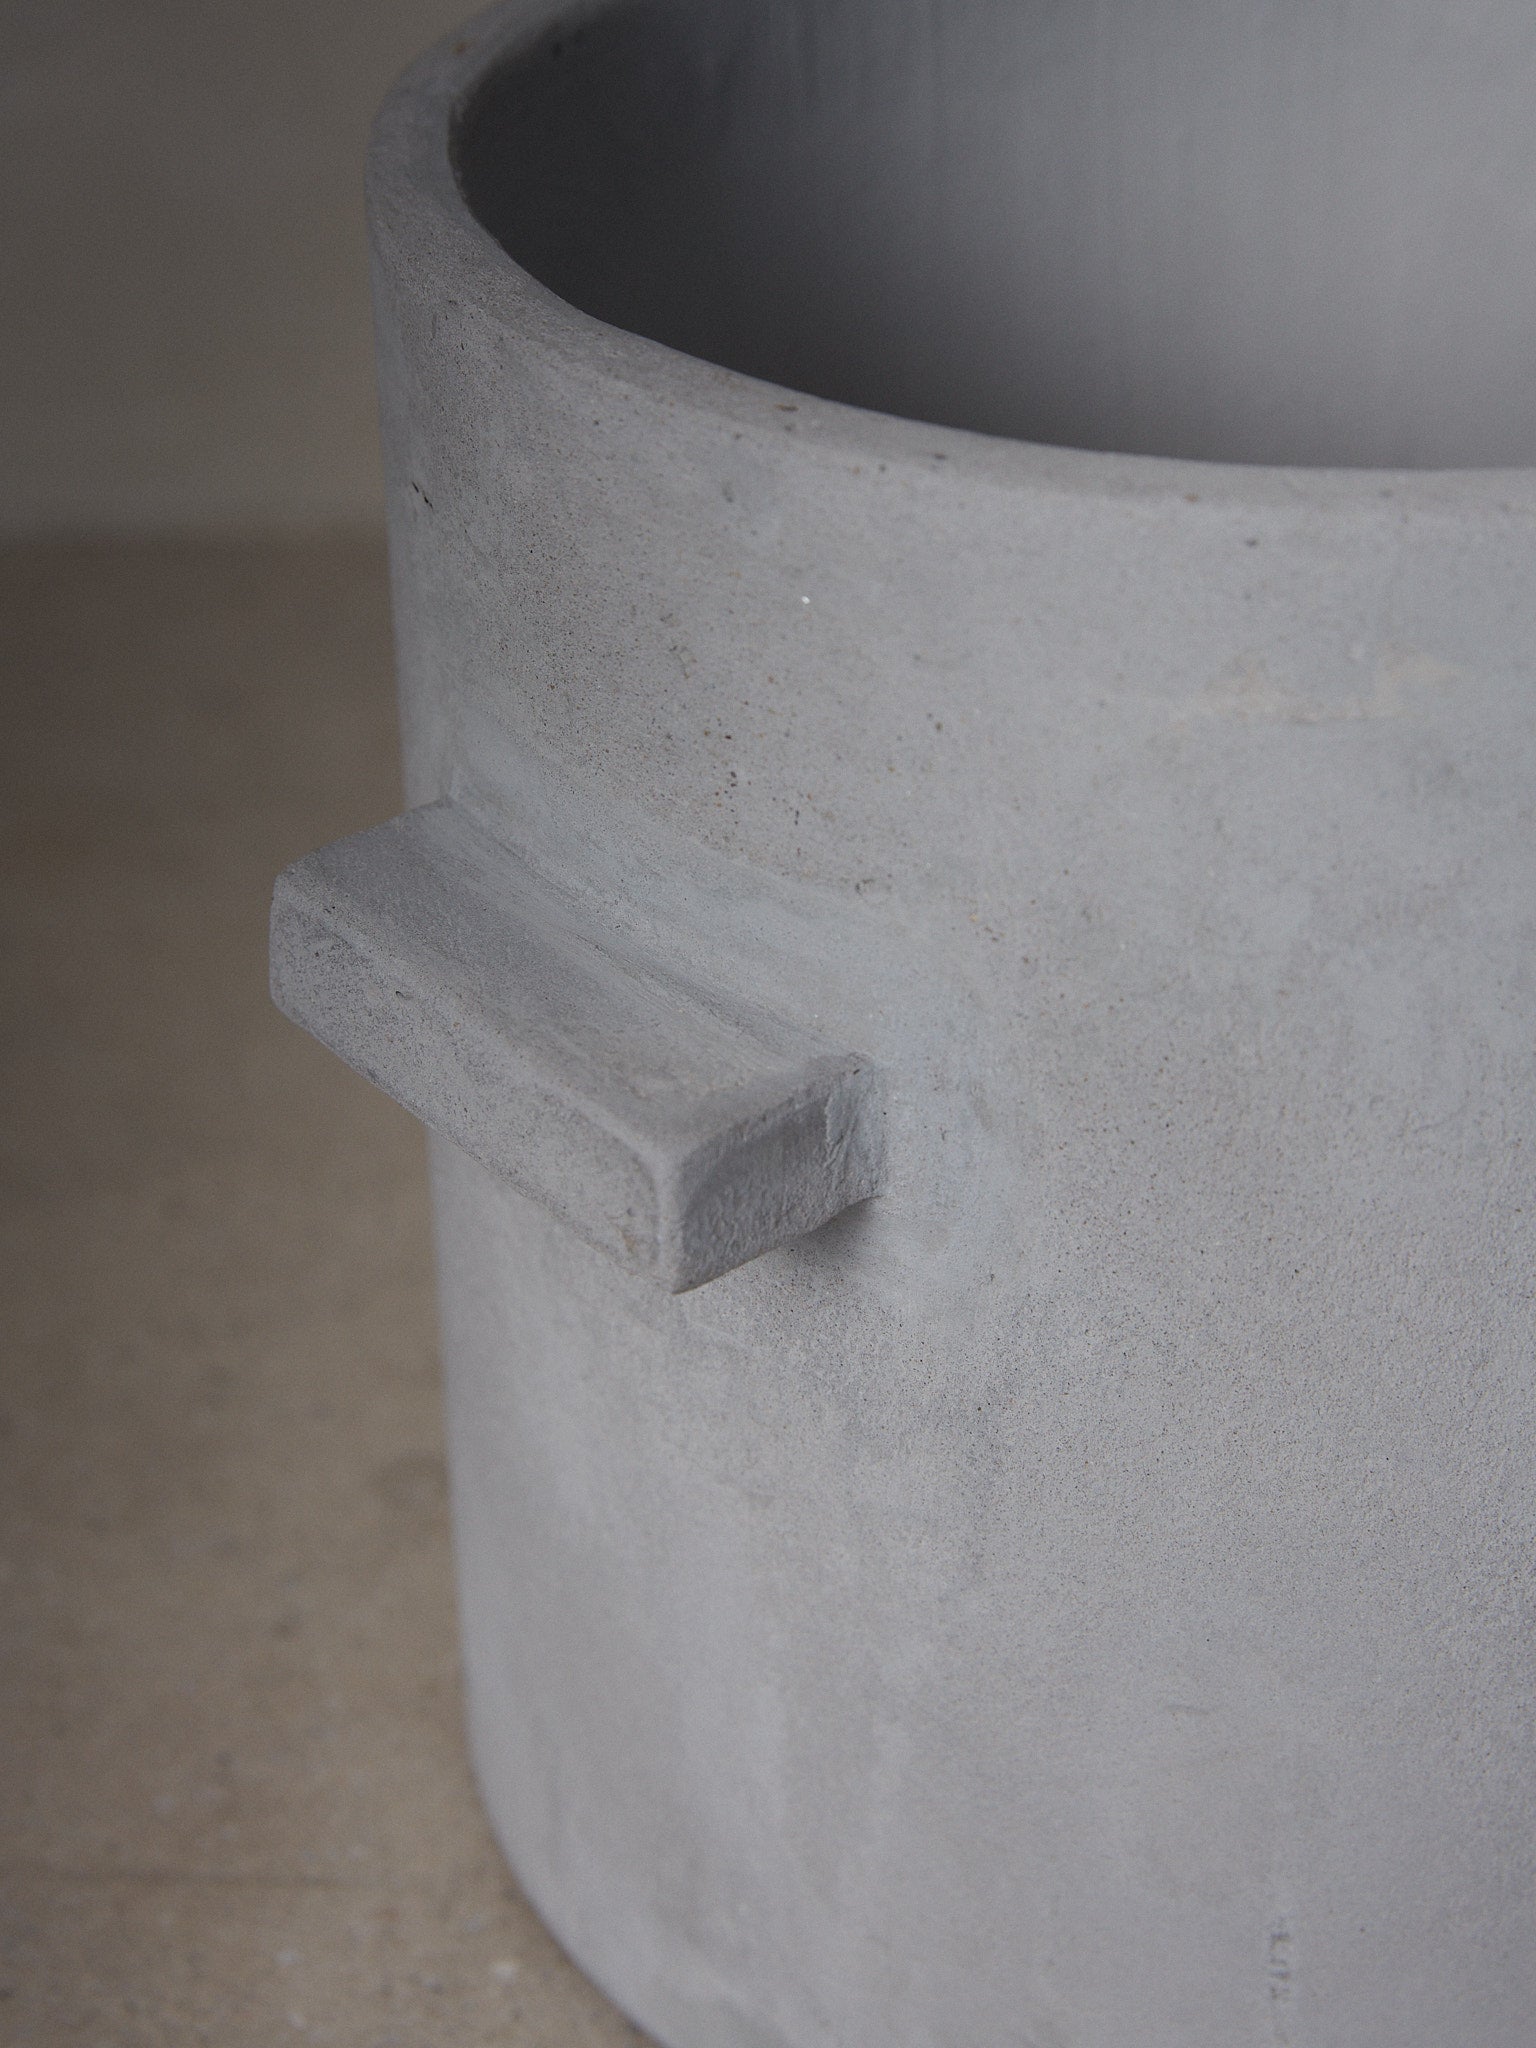 XL Concrete Flowerpot. A sculptural, minimalist planter pot with looped handles, a linear structure and otherworldly vibe. 